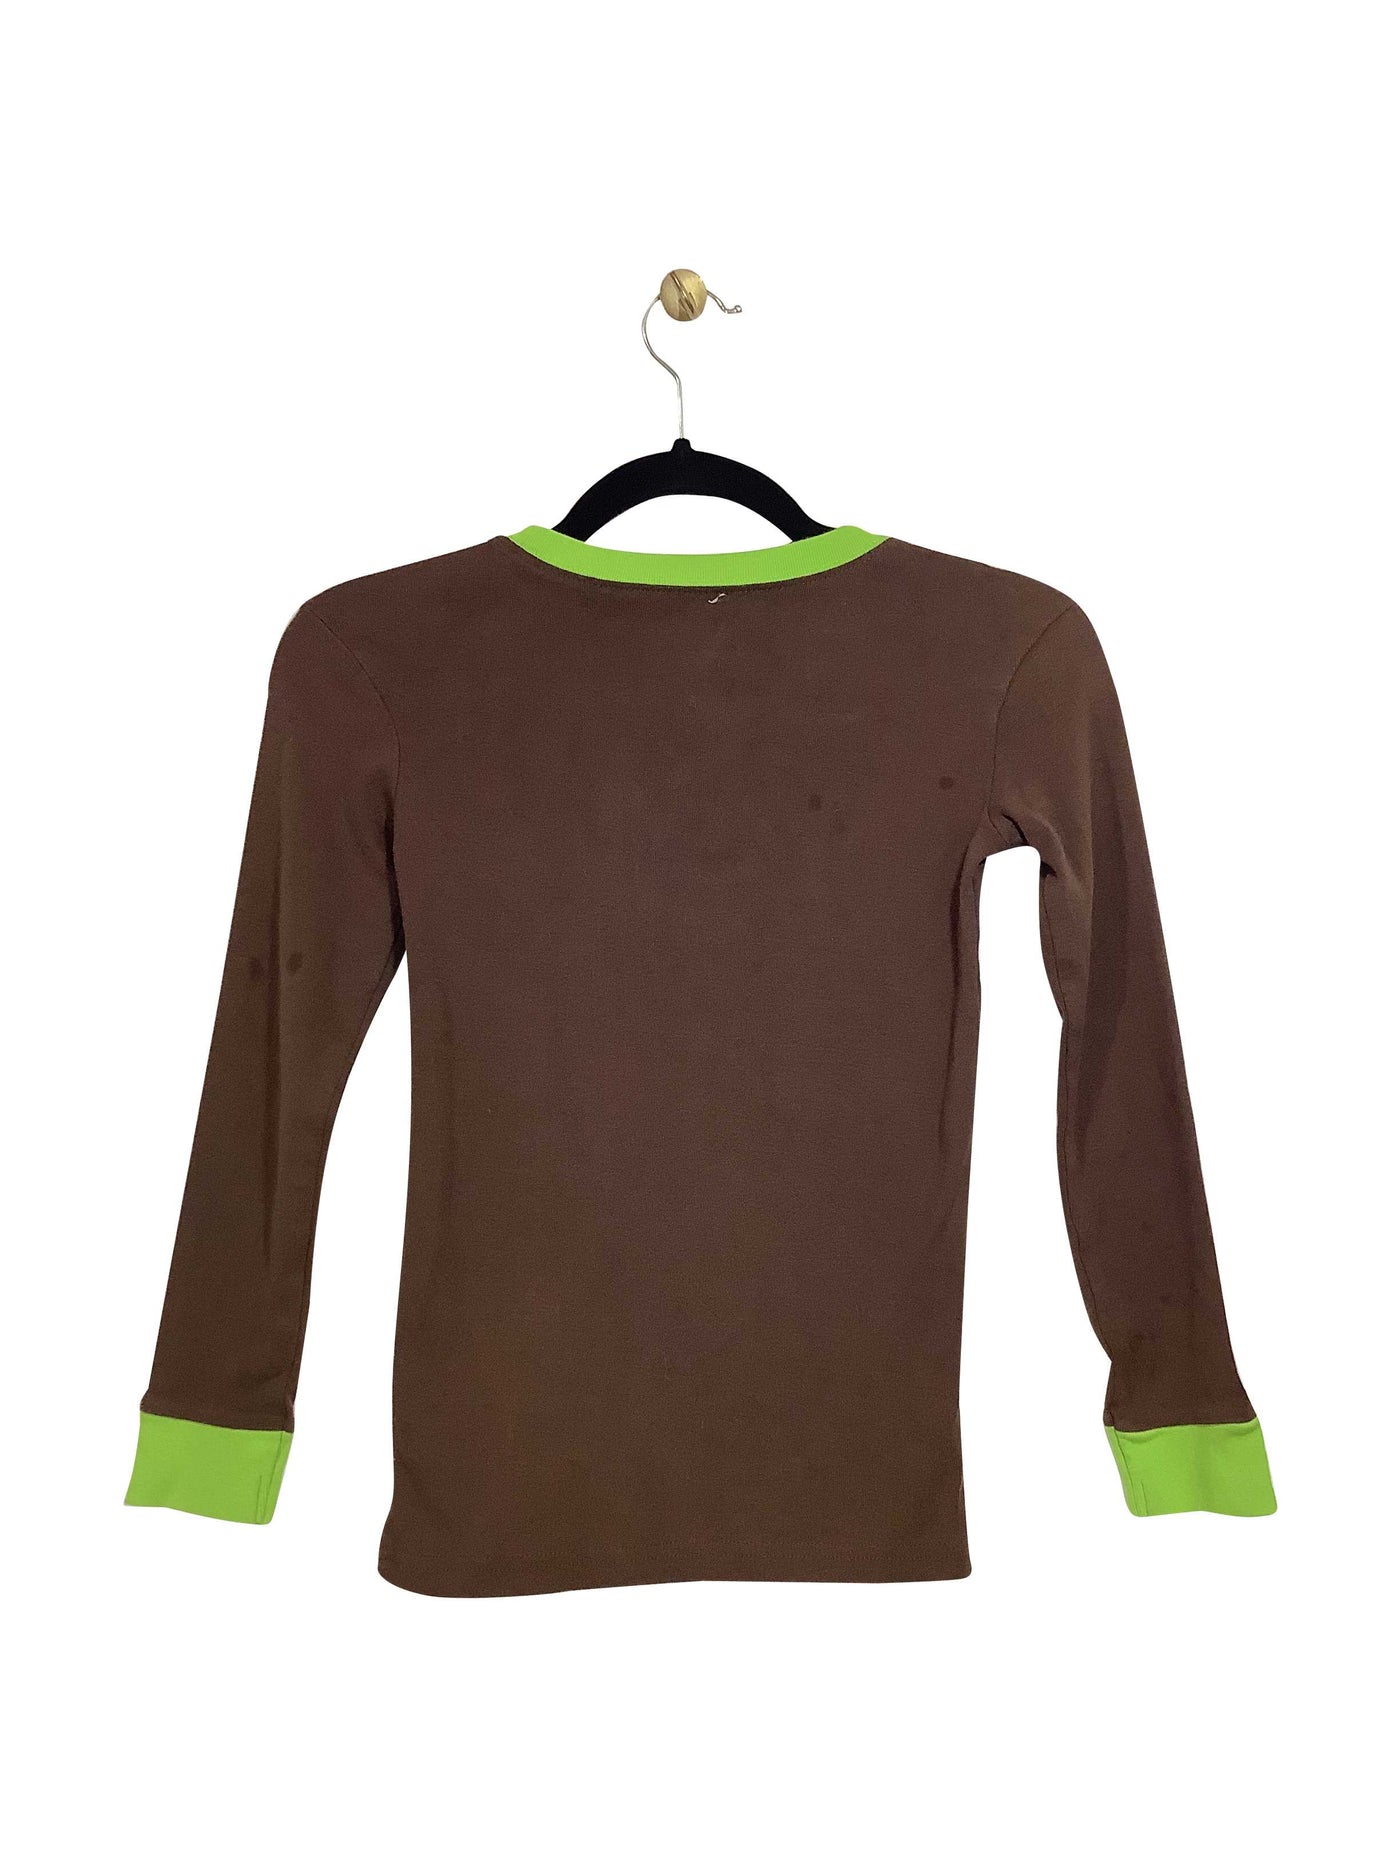 LAZY ONE Regular fit T-shirt in Brown - Size 10 | 6.49 $ KOOP